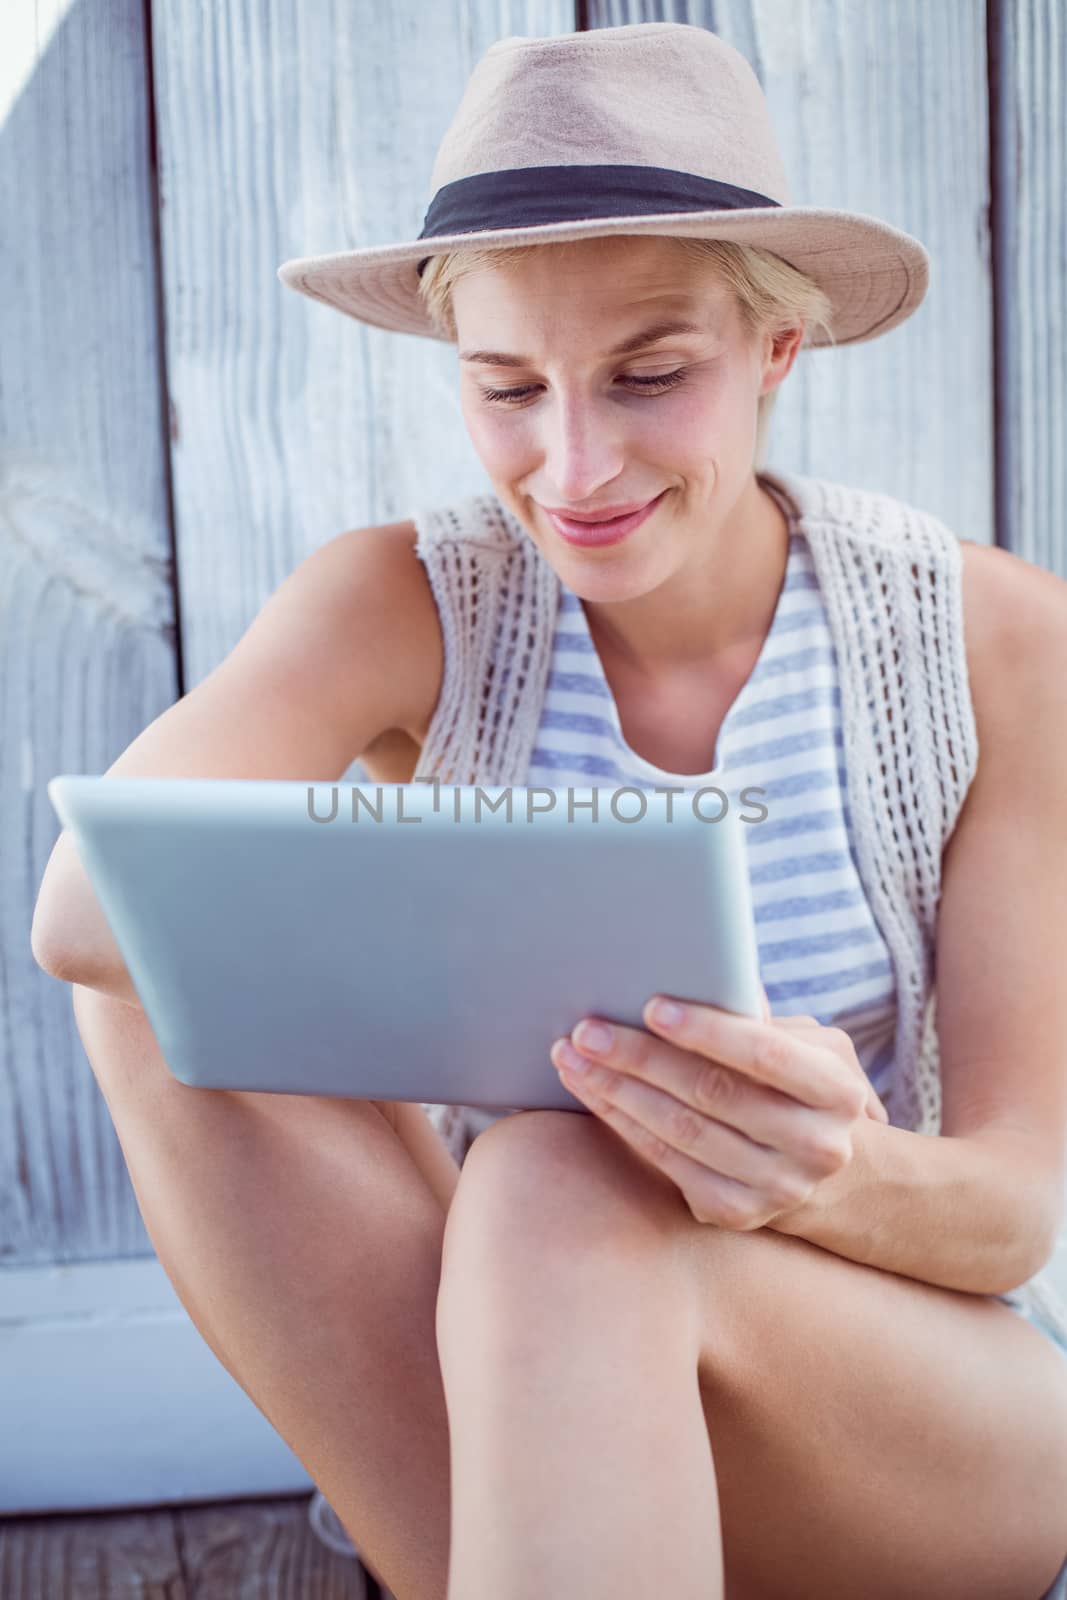 Pretty blonde woman using her tablet on wooden background